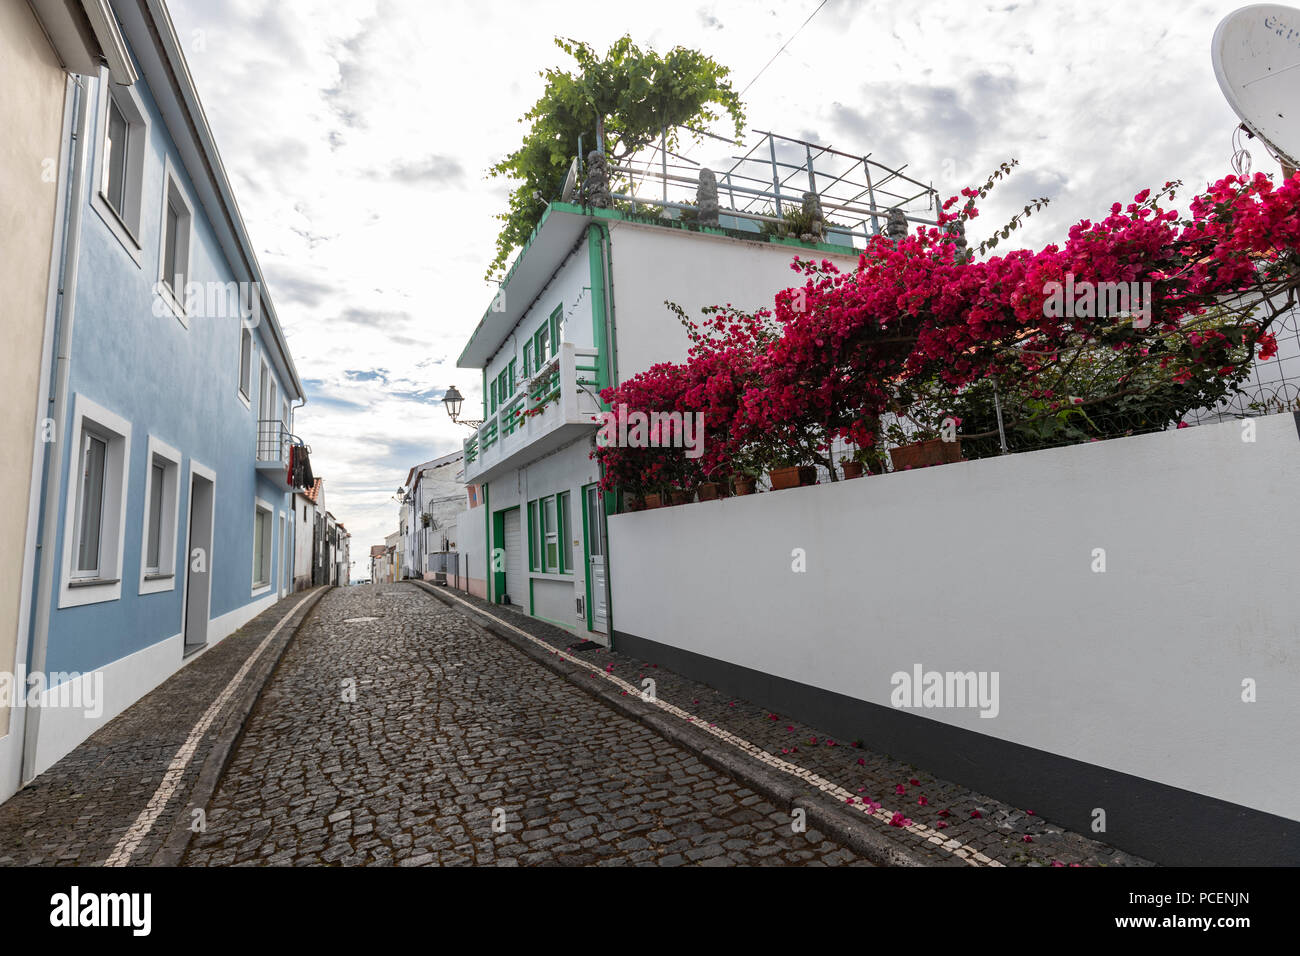 Narrow street with rural houses in Lajes do Pico, Pico island, Azores, Portugal Stock Photo